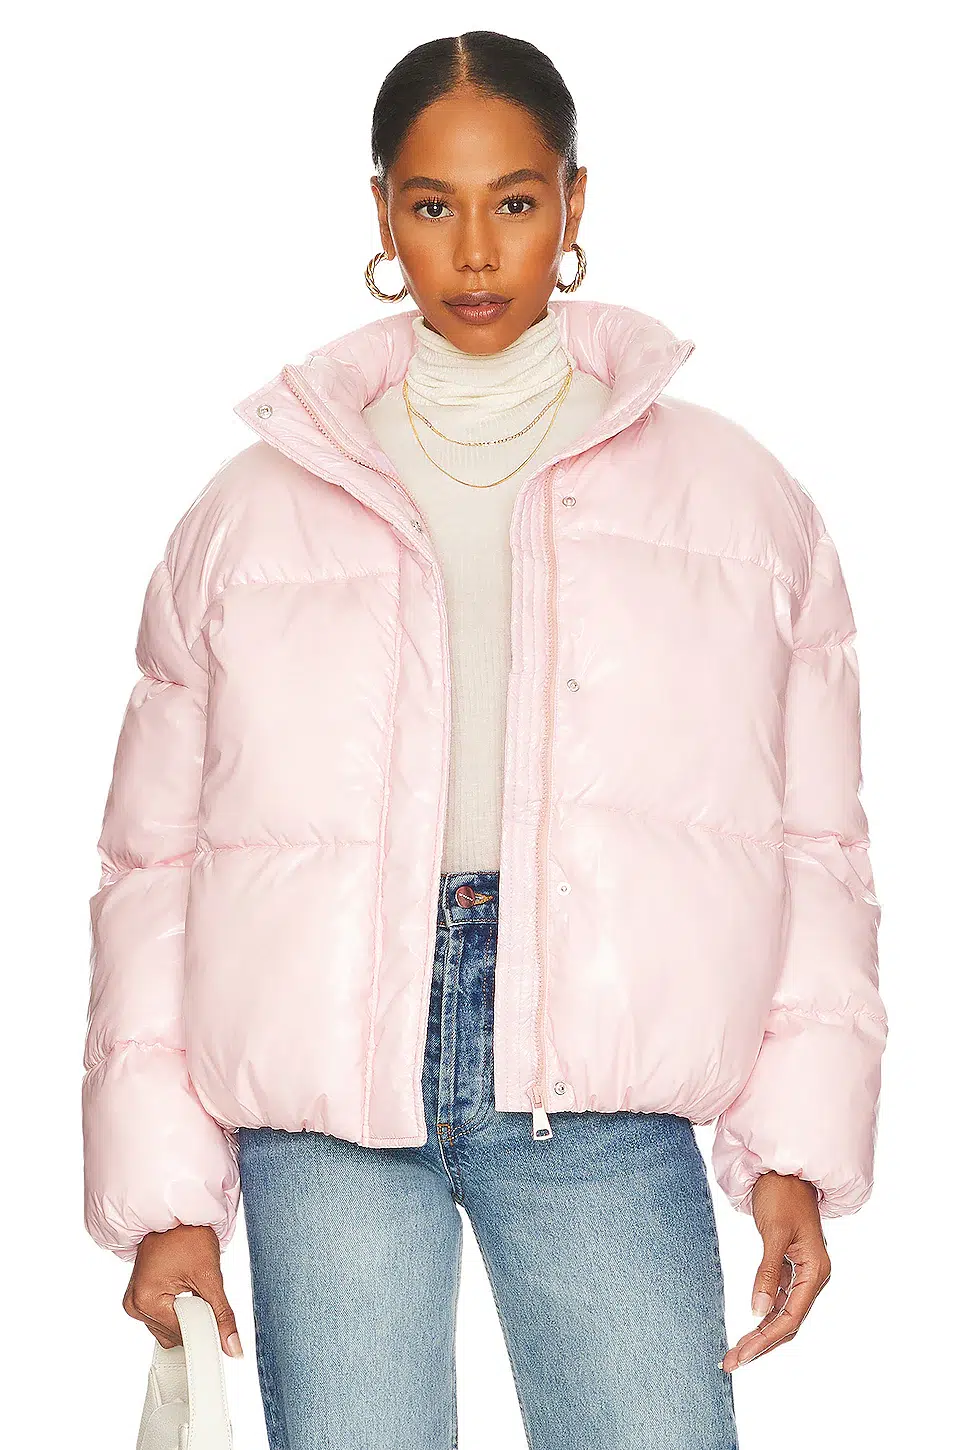 The 10 Best Pink Puffer Jackets to Shop in 2023